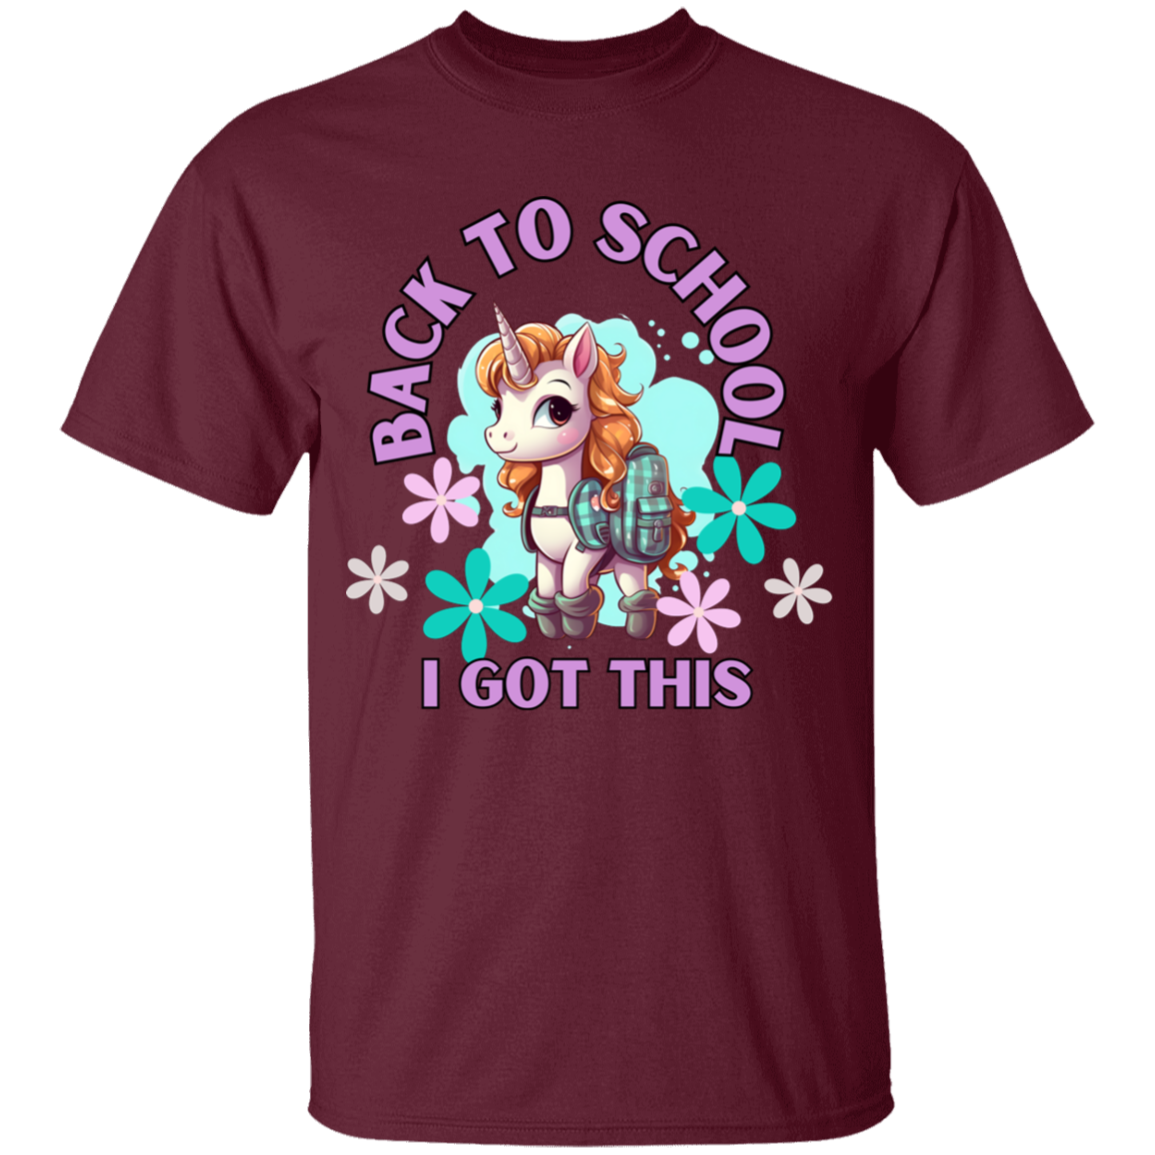 Back to School, I Got This - Youth T-Shirt with Ready-for-School Unicorn